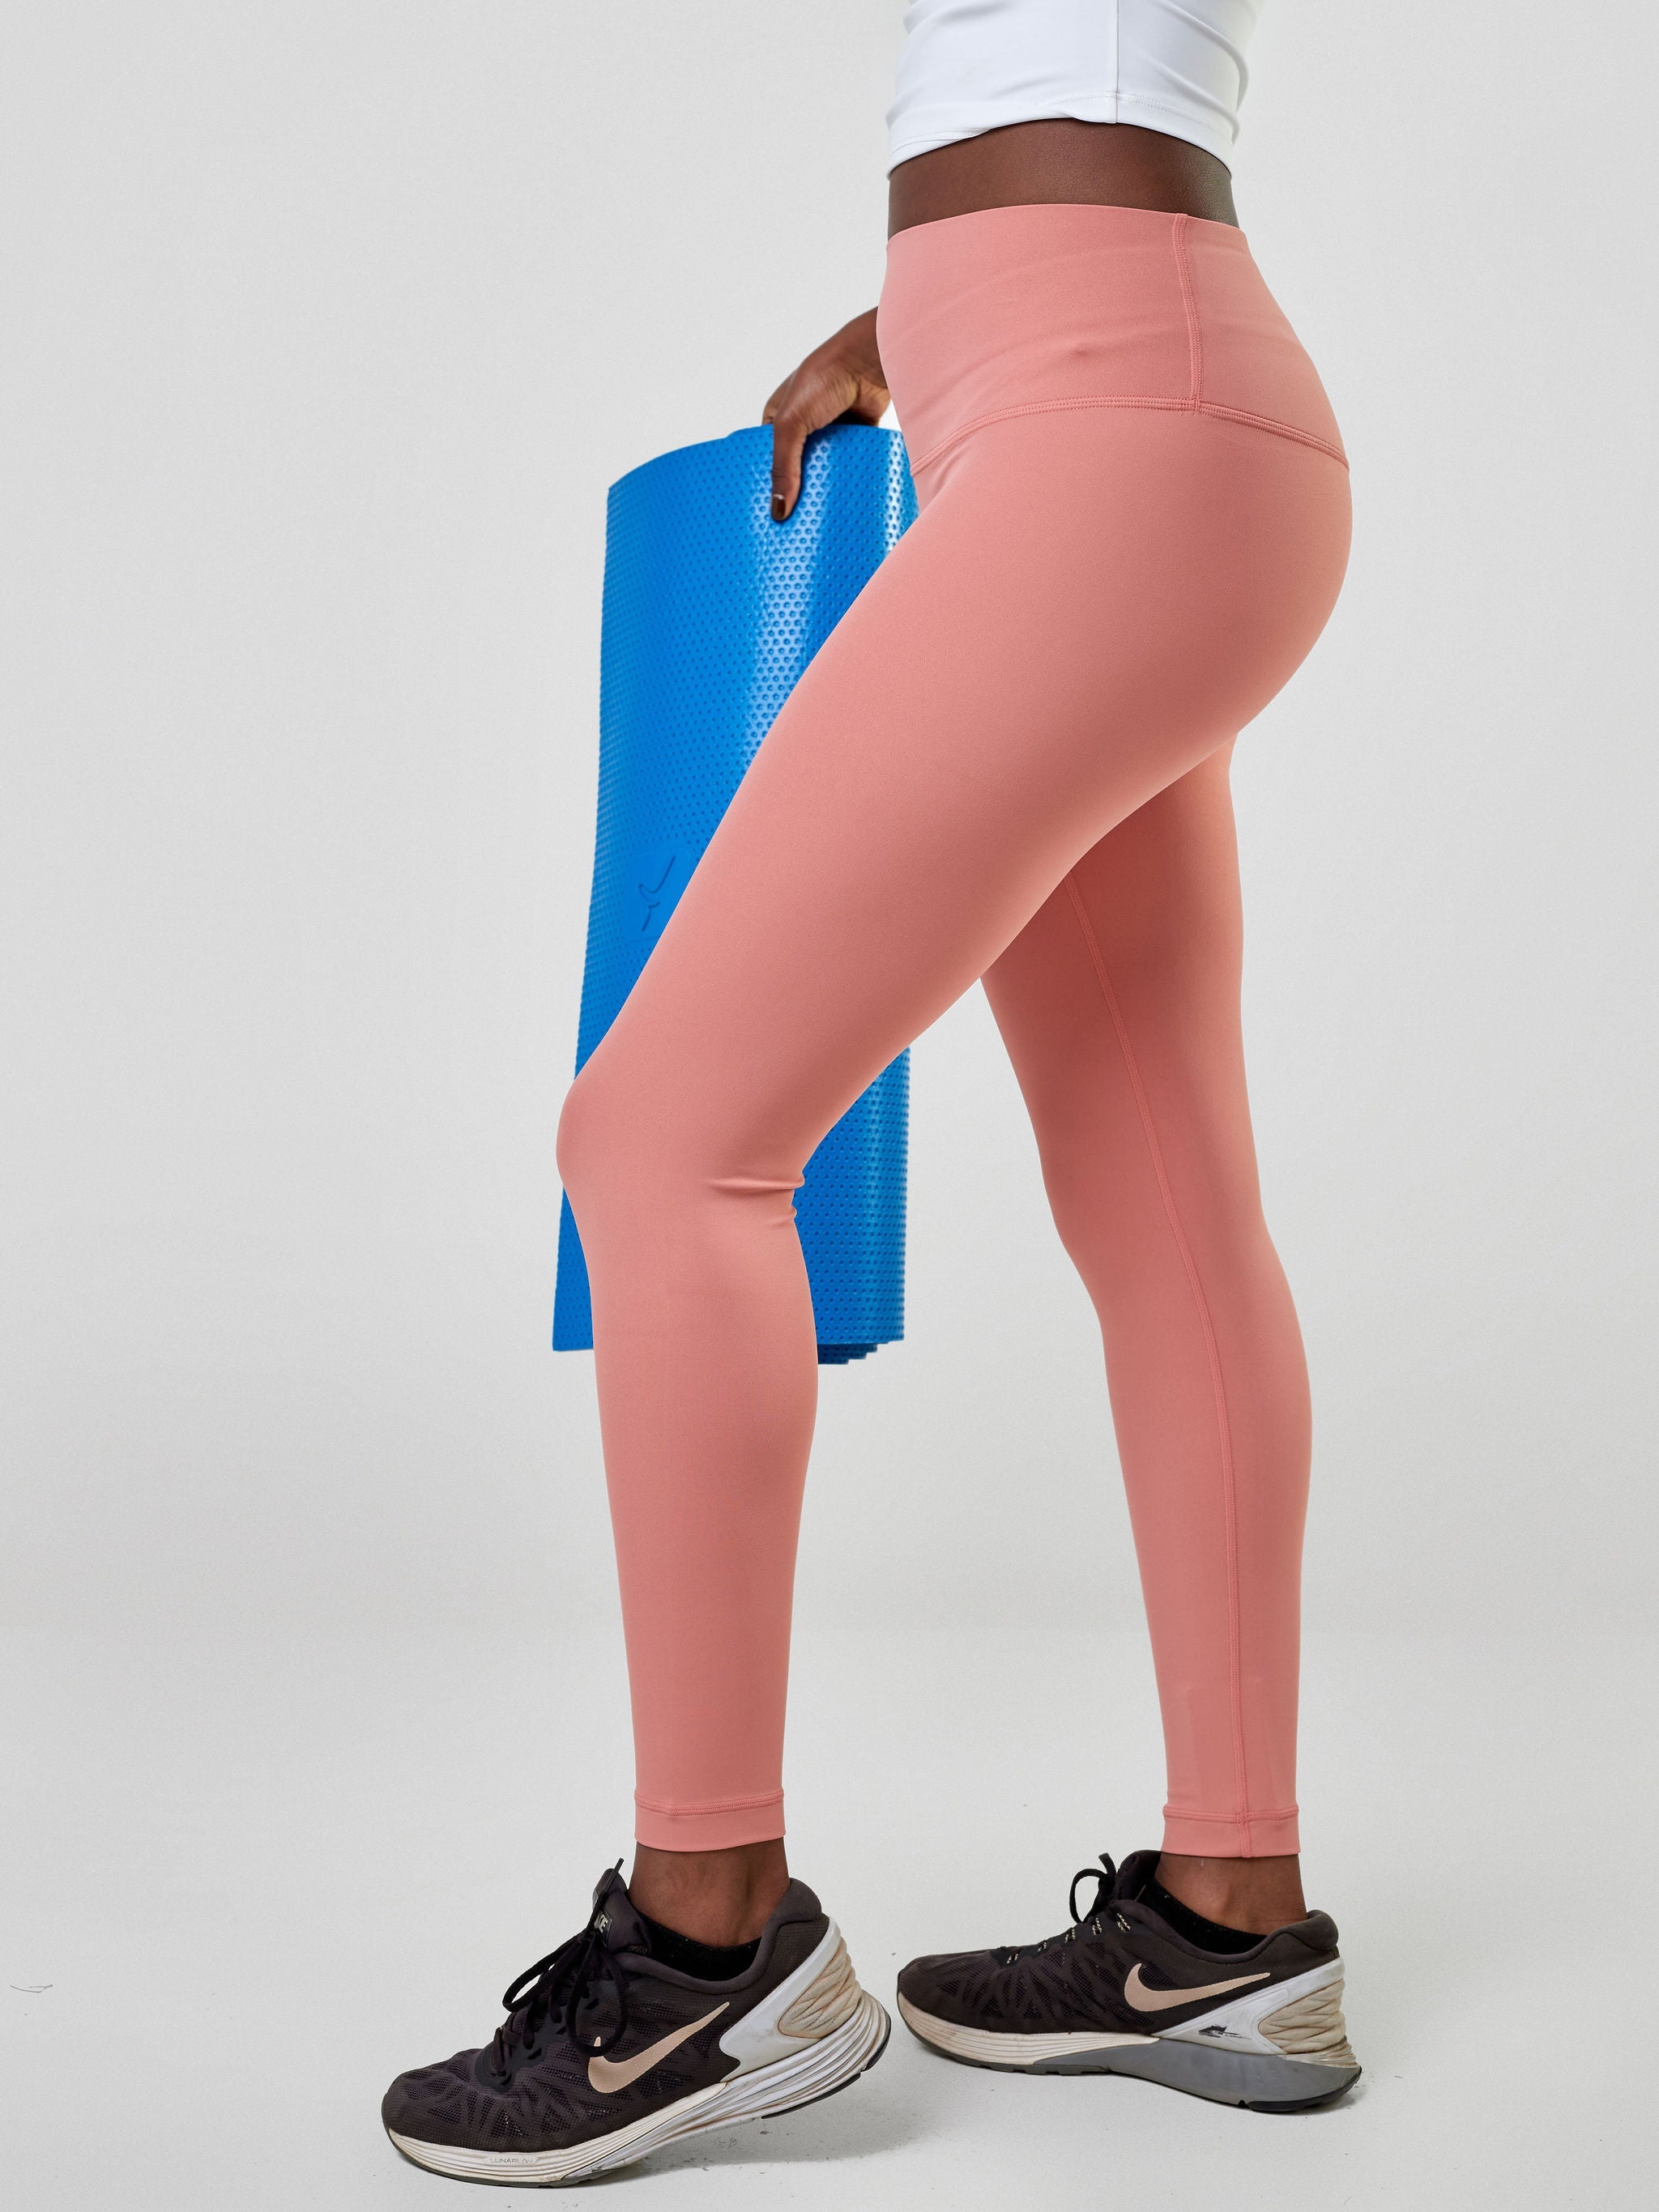 Ava Fitness Bella Workout Leggings - Coral Red